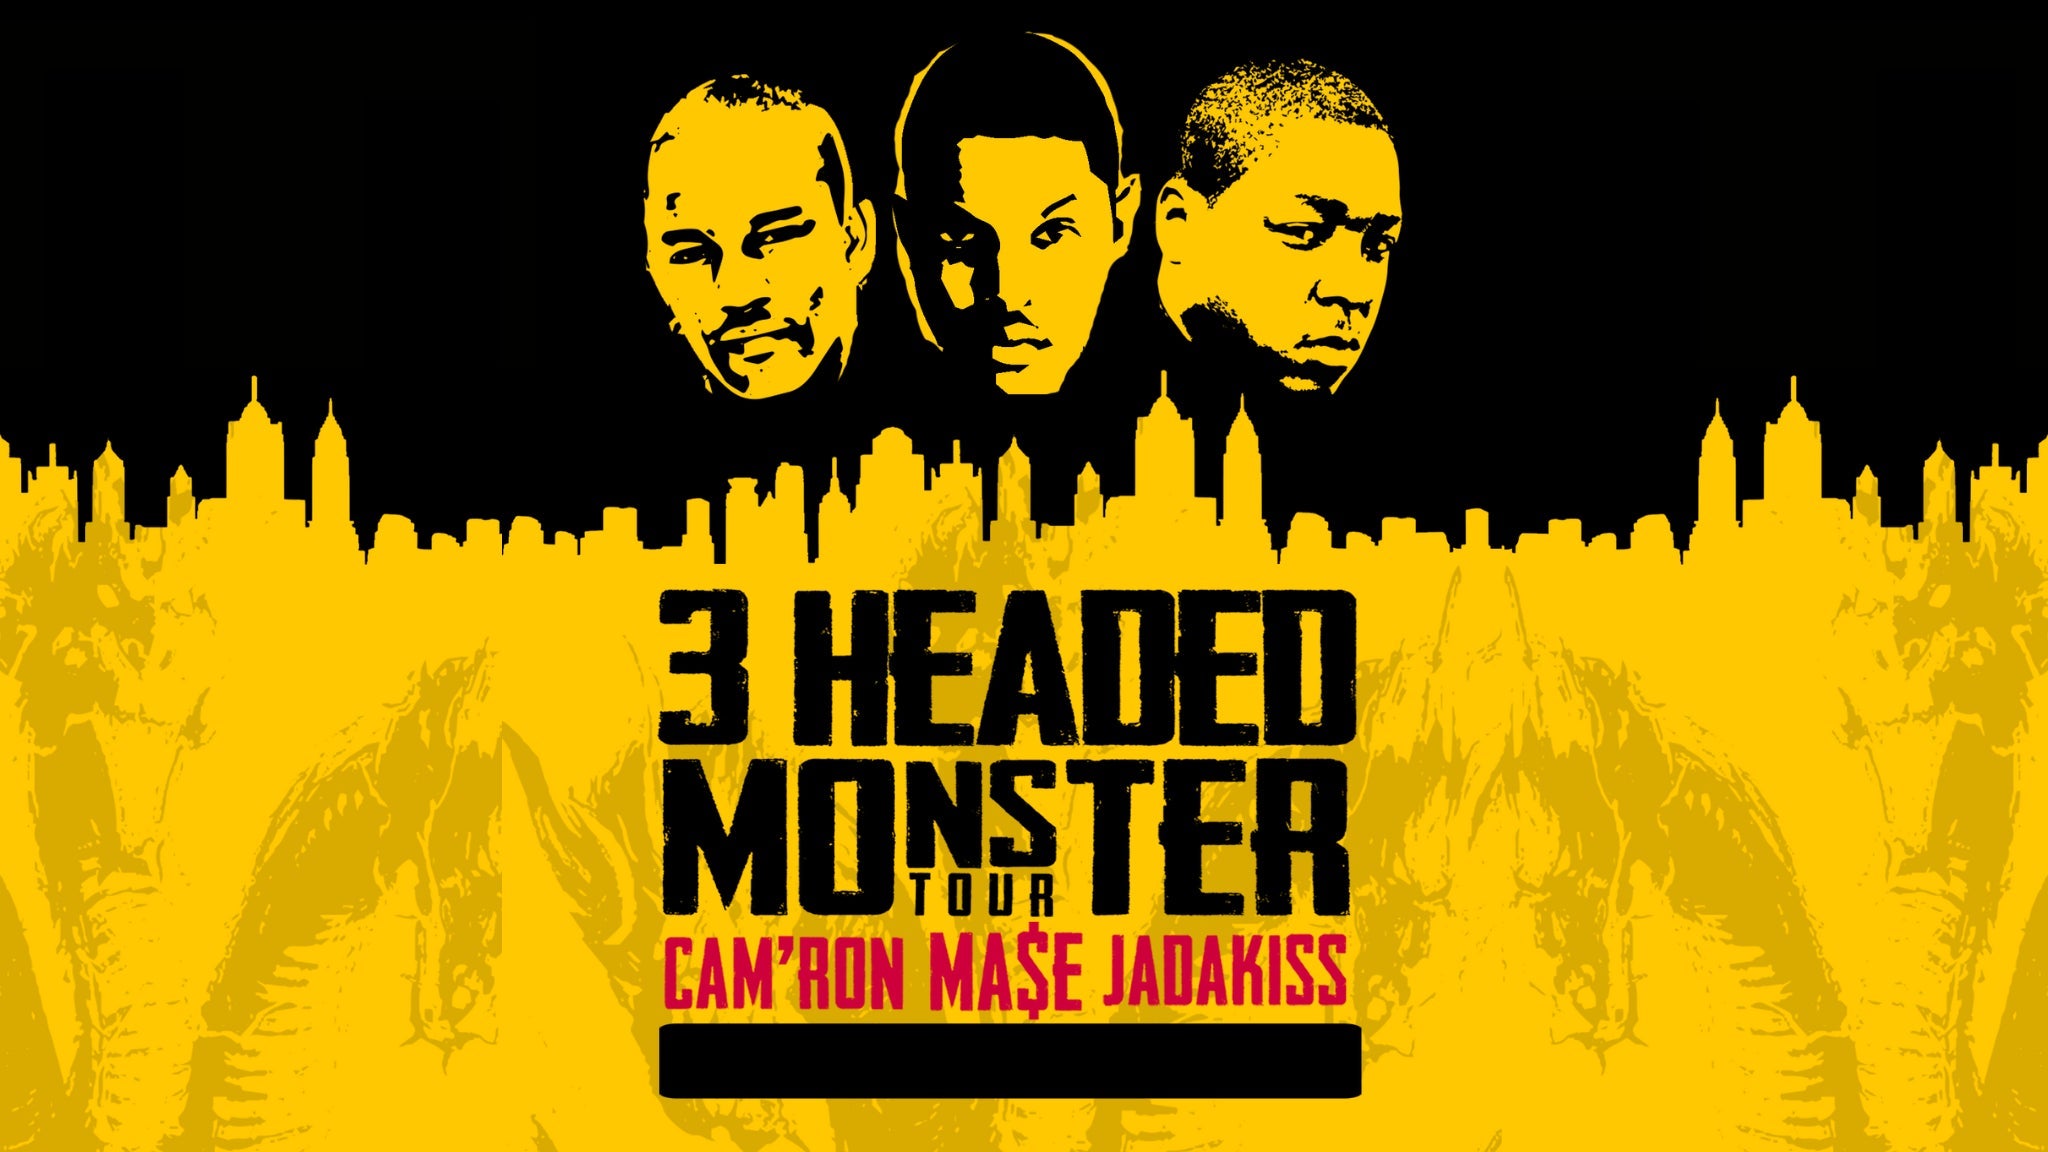 3 Headed Monster Tour presale password for early tickets in Pittsburgh